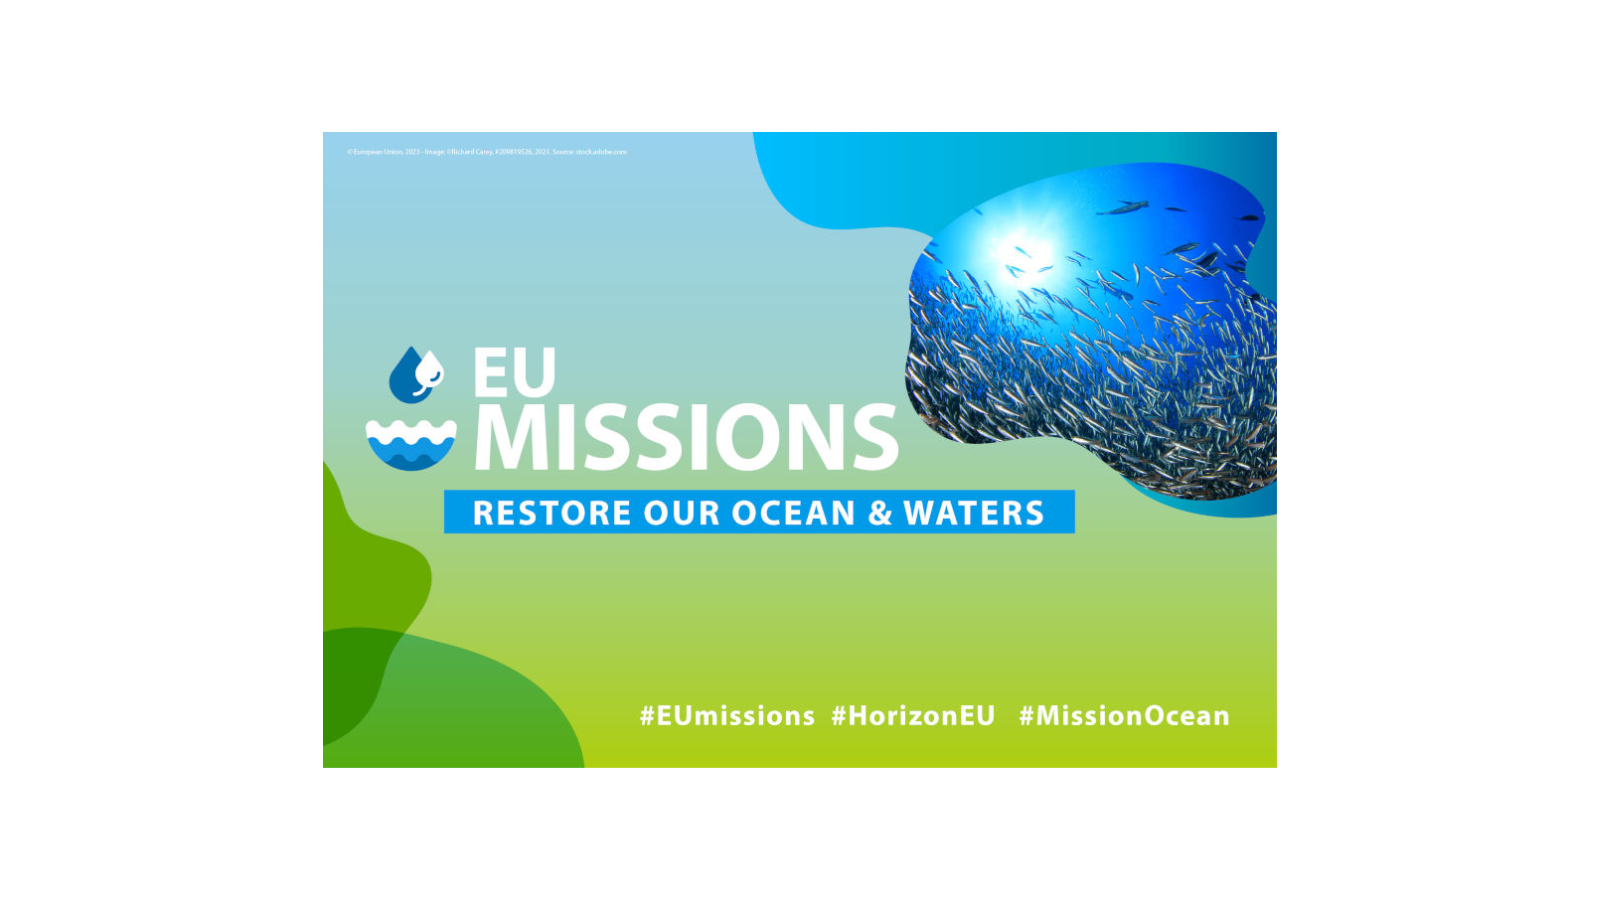 Mission “Restore our Ocean and Waters by 2030”: The Mediterranean lighthouse in action